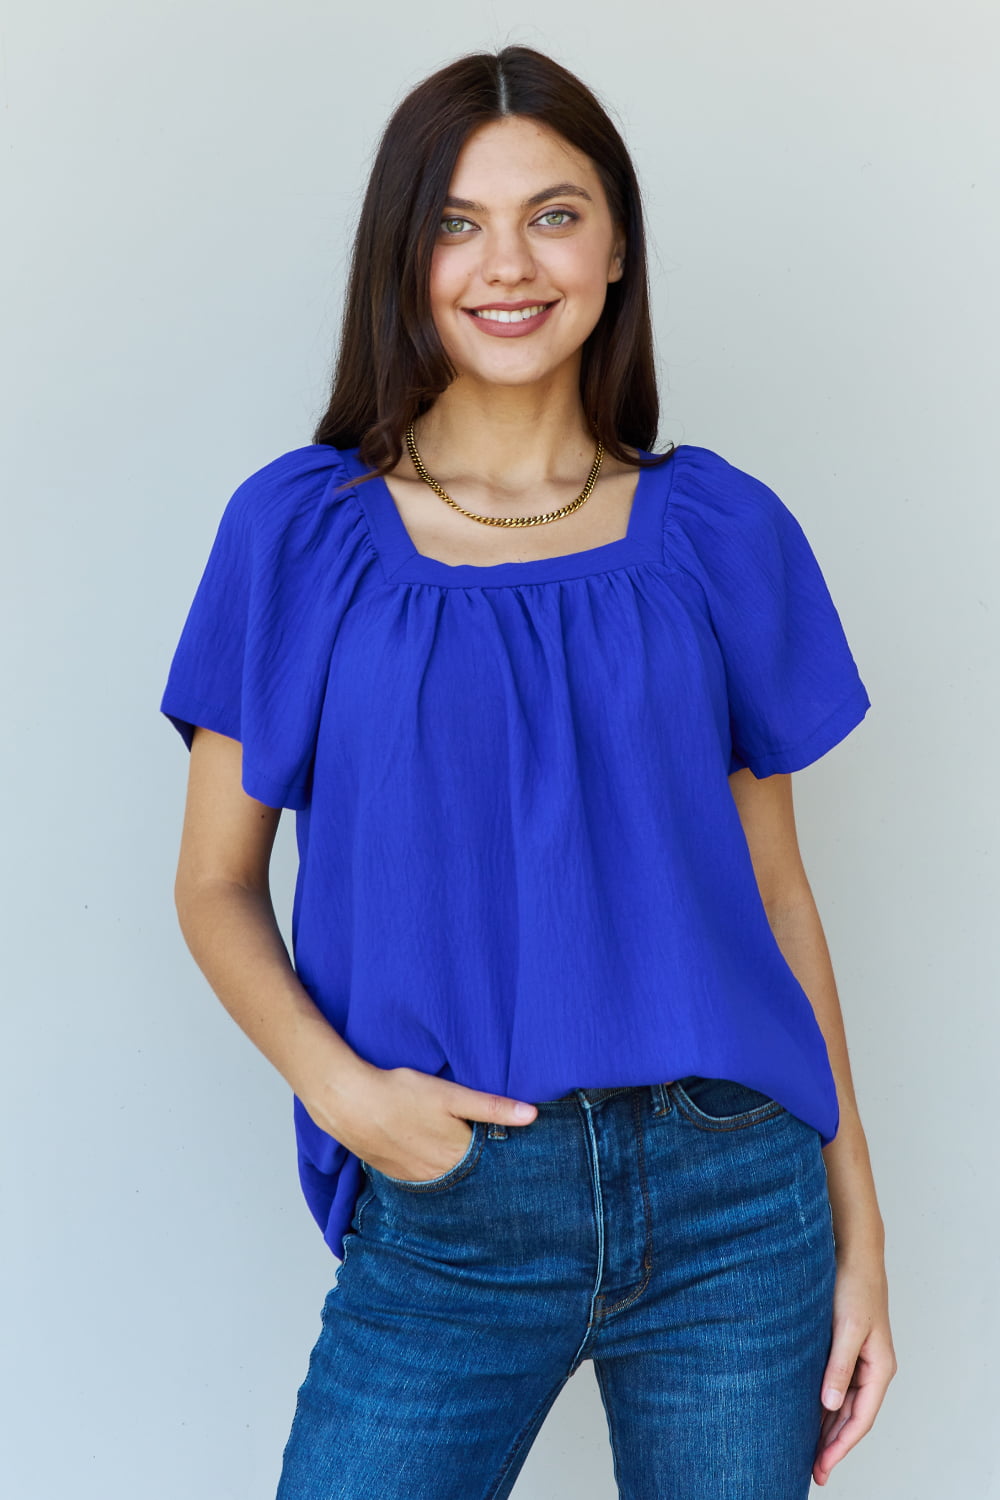 Ninexis Keep Me Close Square Neck Short Sleeve Blouse in Royal  Krazy Heart Designs Boutique Royal S 